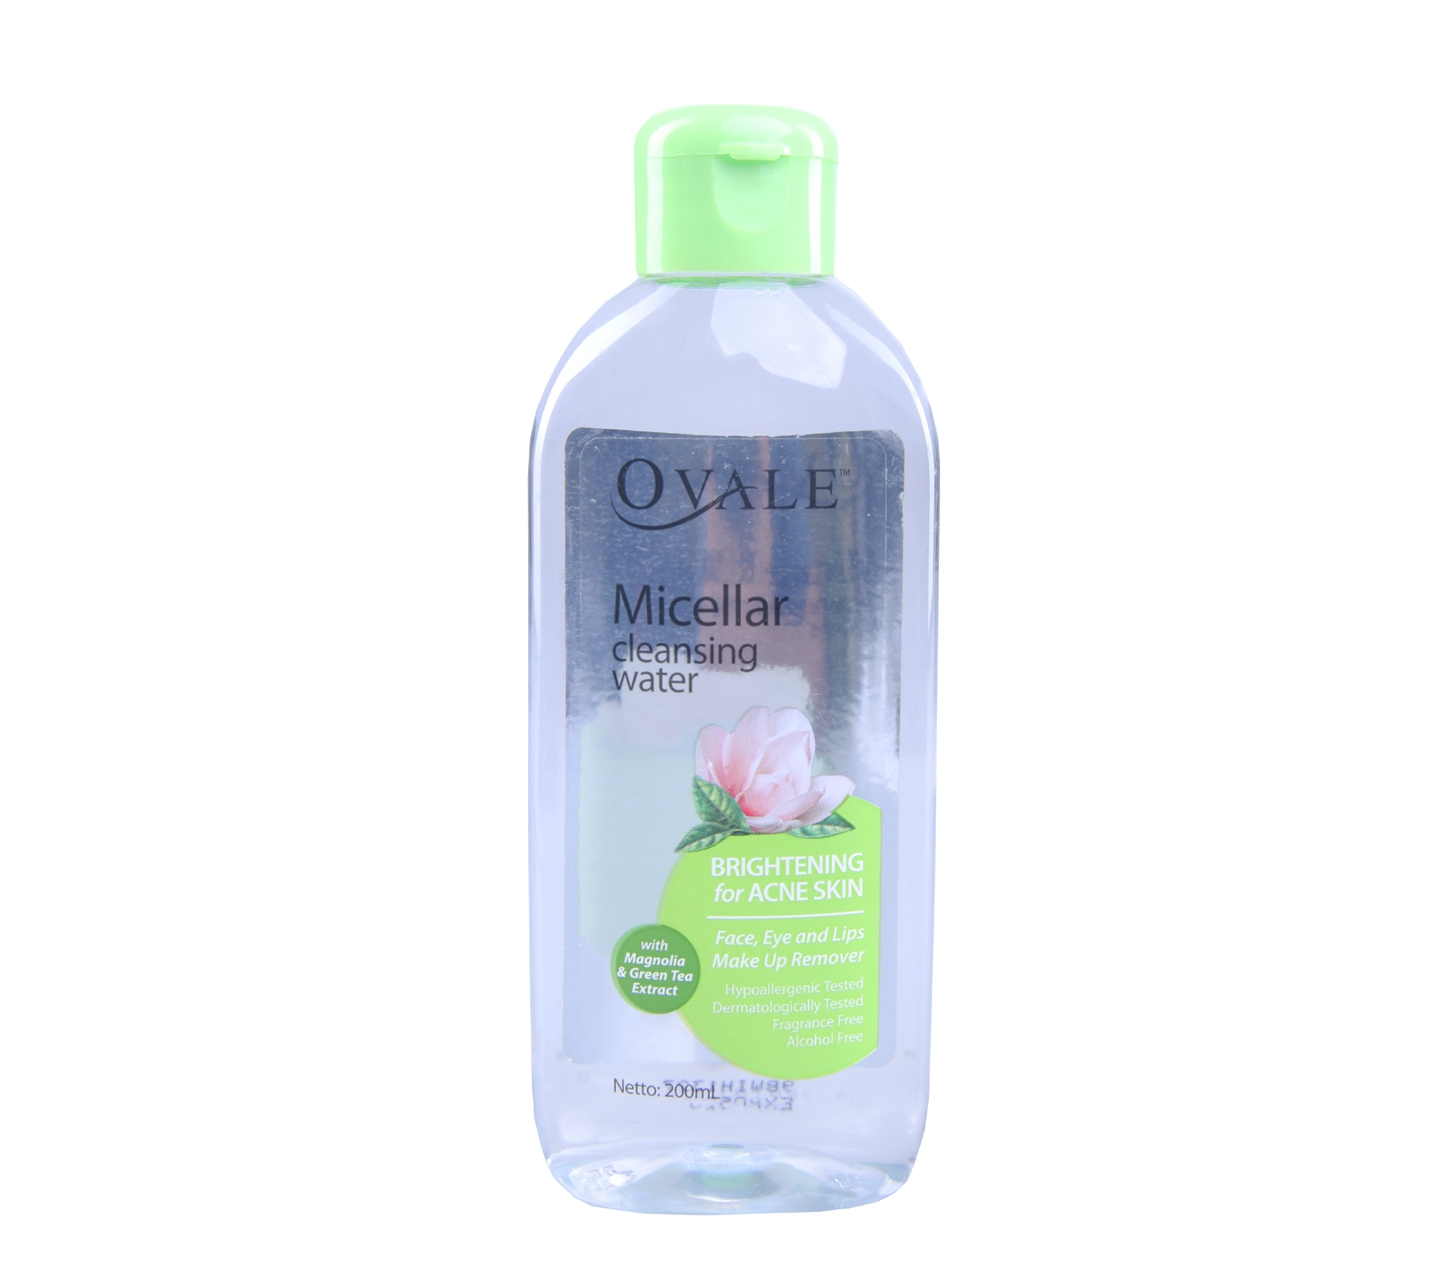 Ovale Micellar cleansing Water Brightening for Acne Skin Skin Care